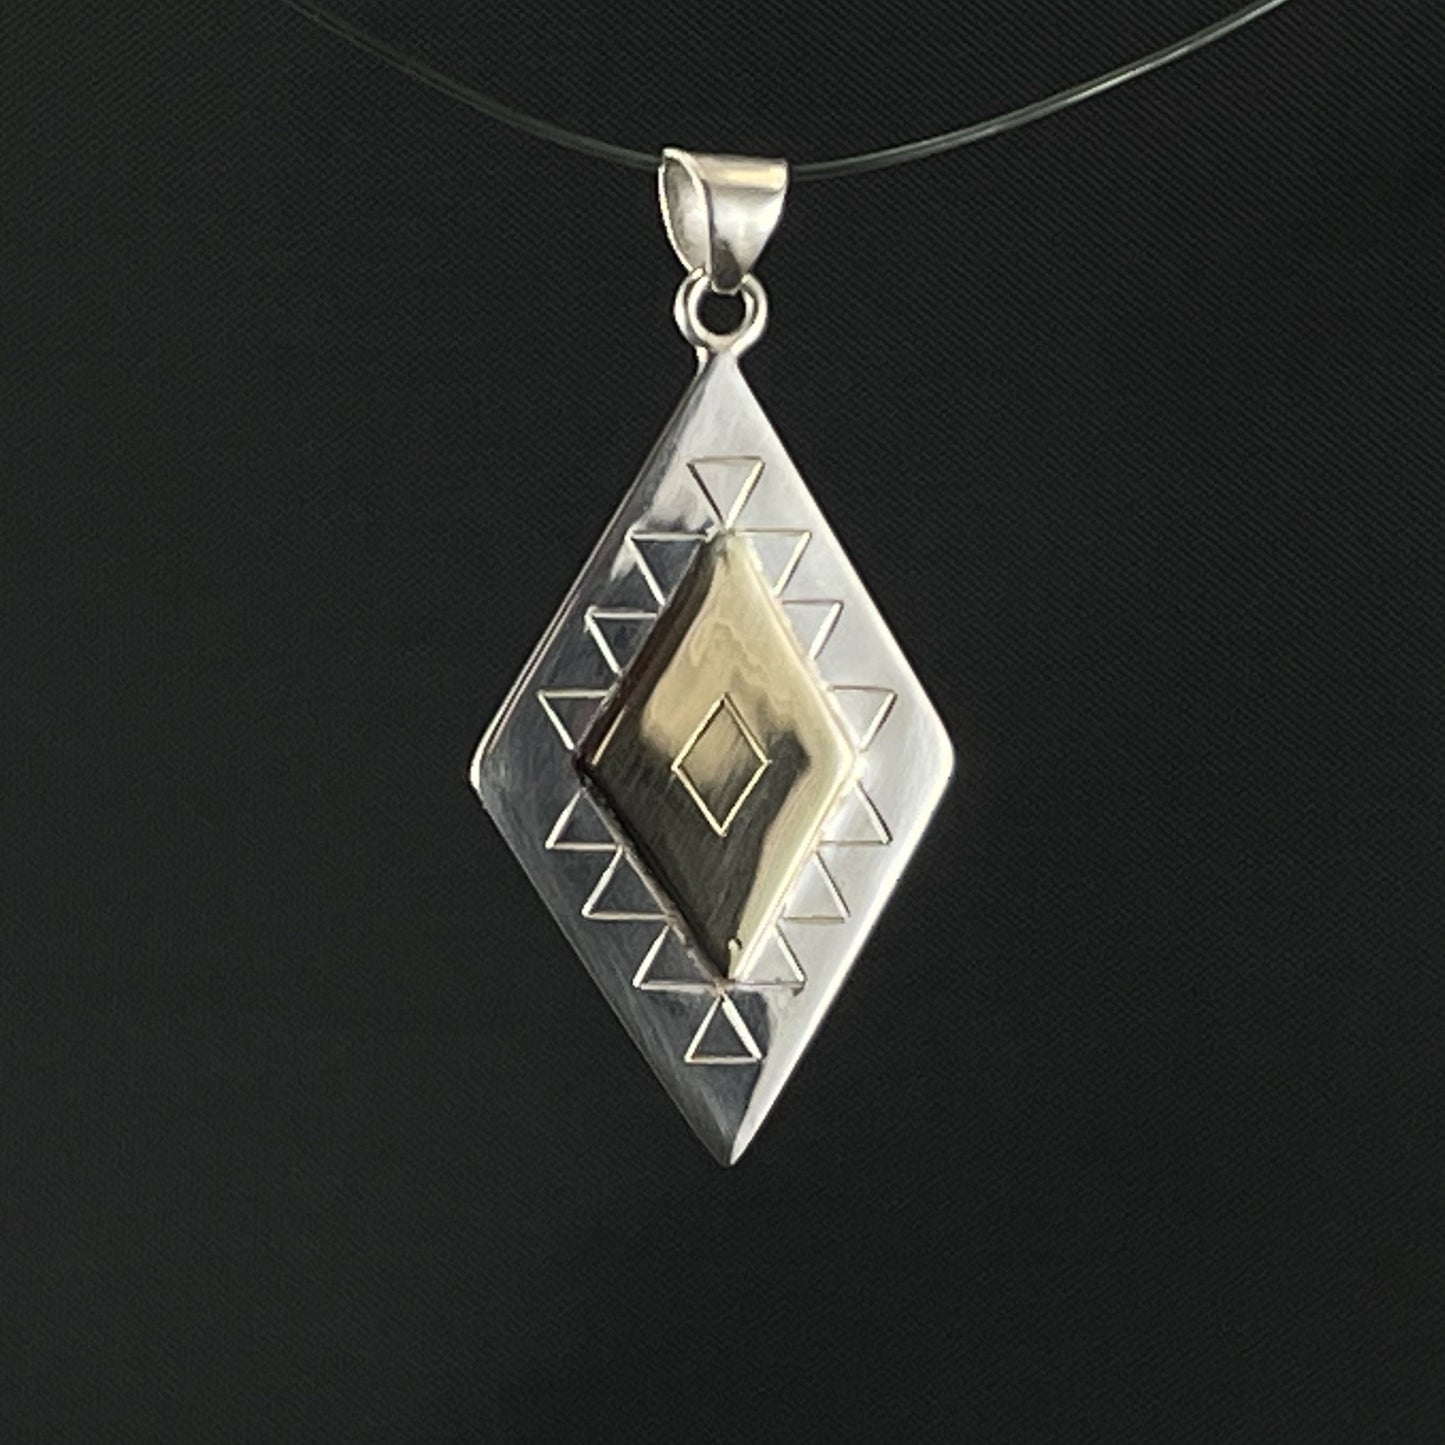 Vintage Geometric Design Silver Pendant with 14k Gold Overlay